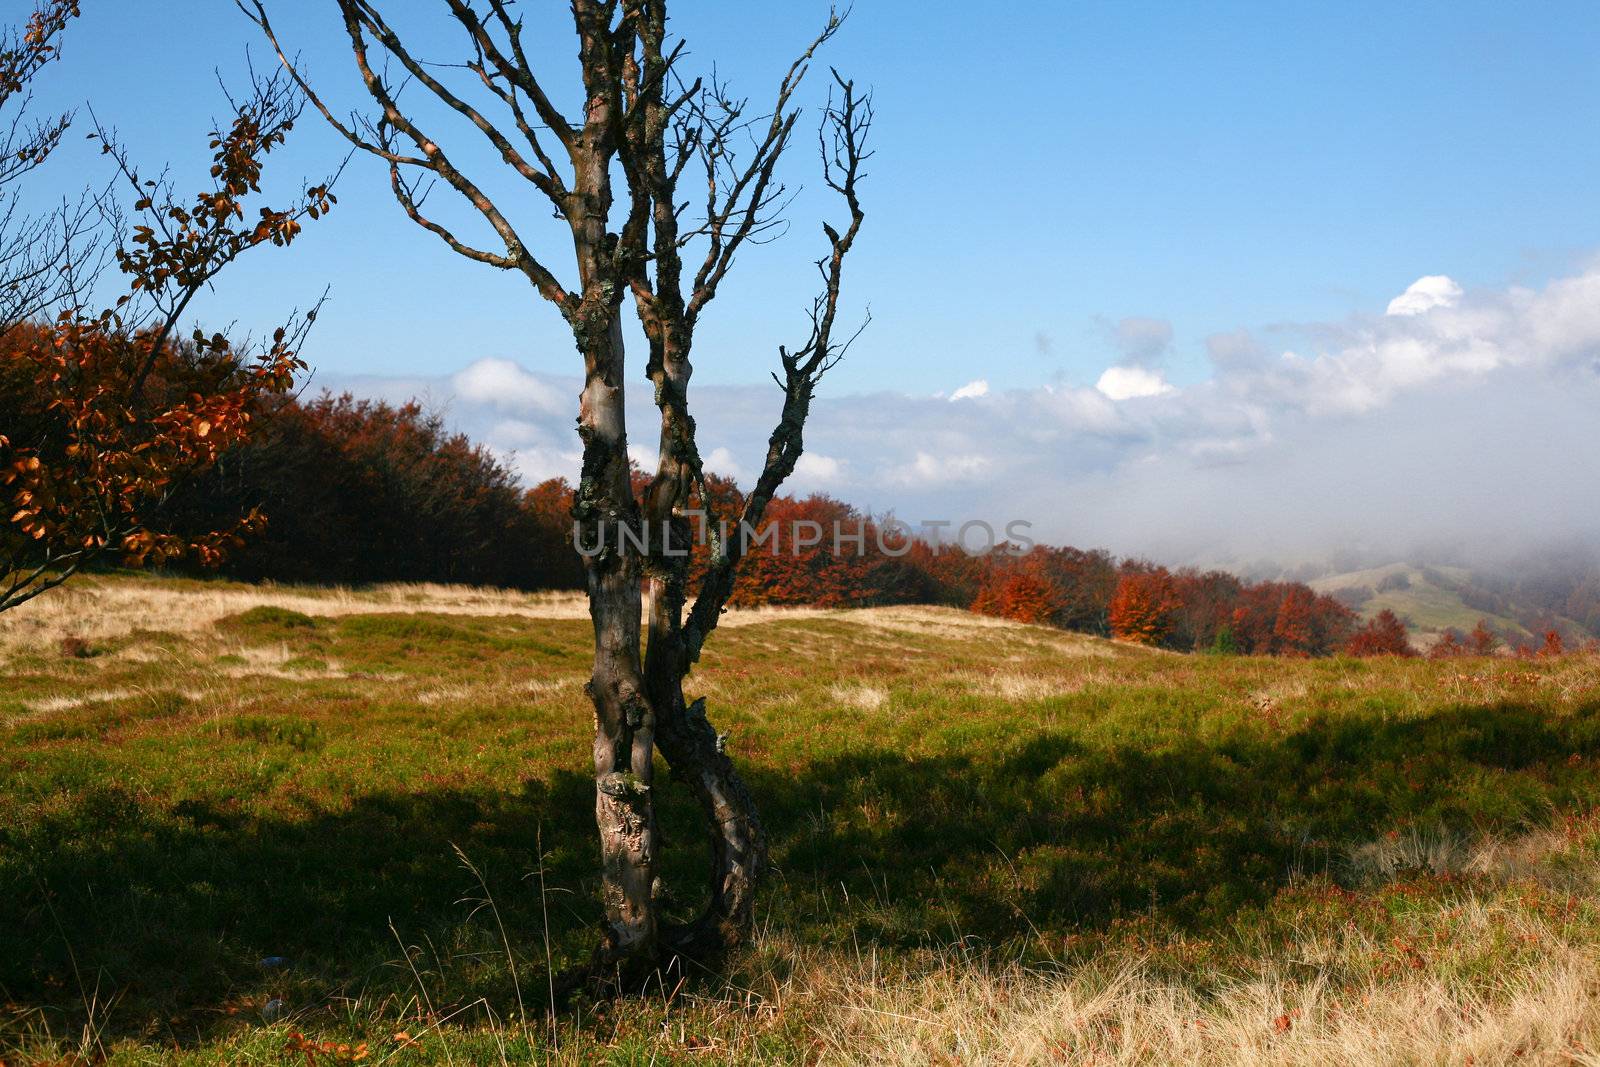 An image of trees without leaves in autumn mountains